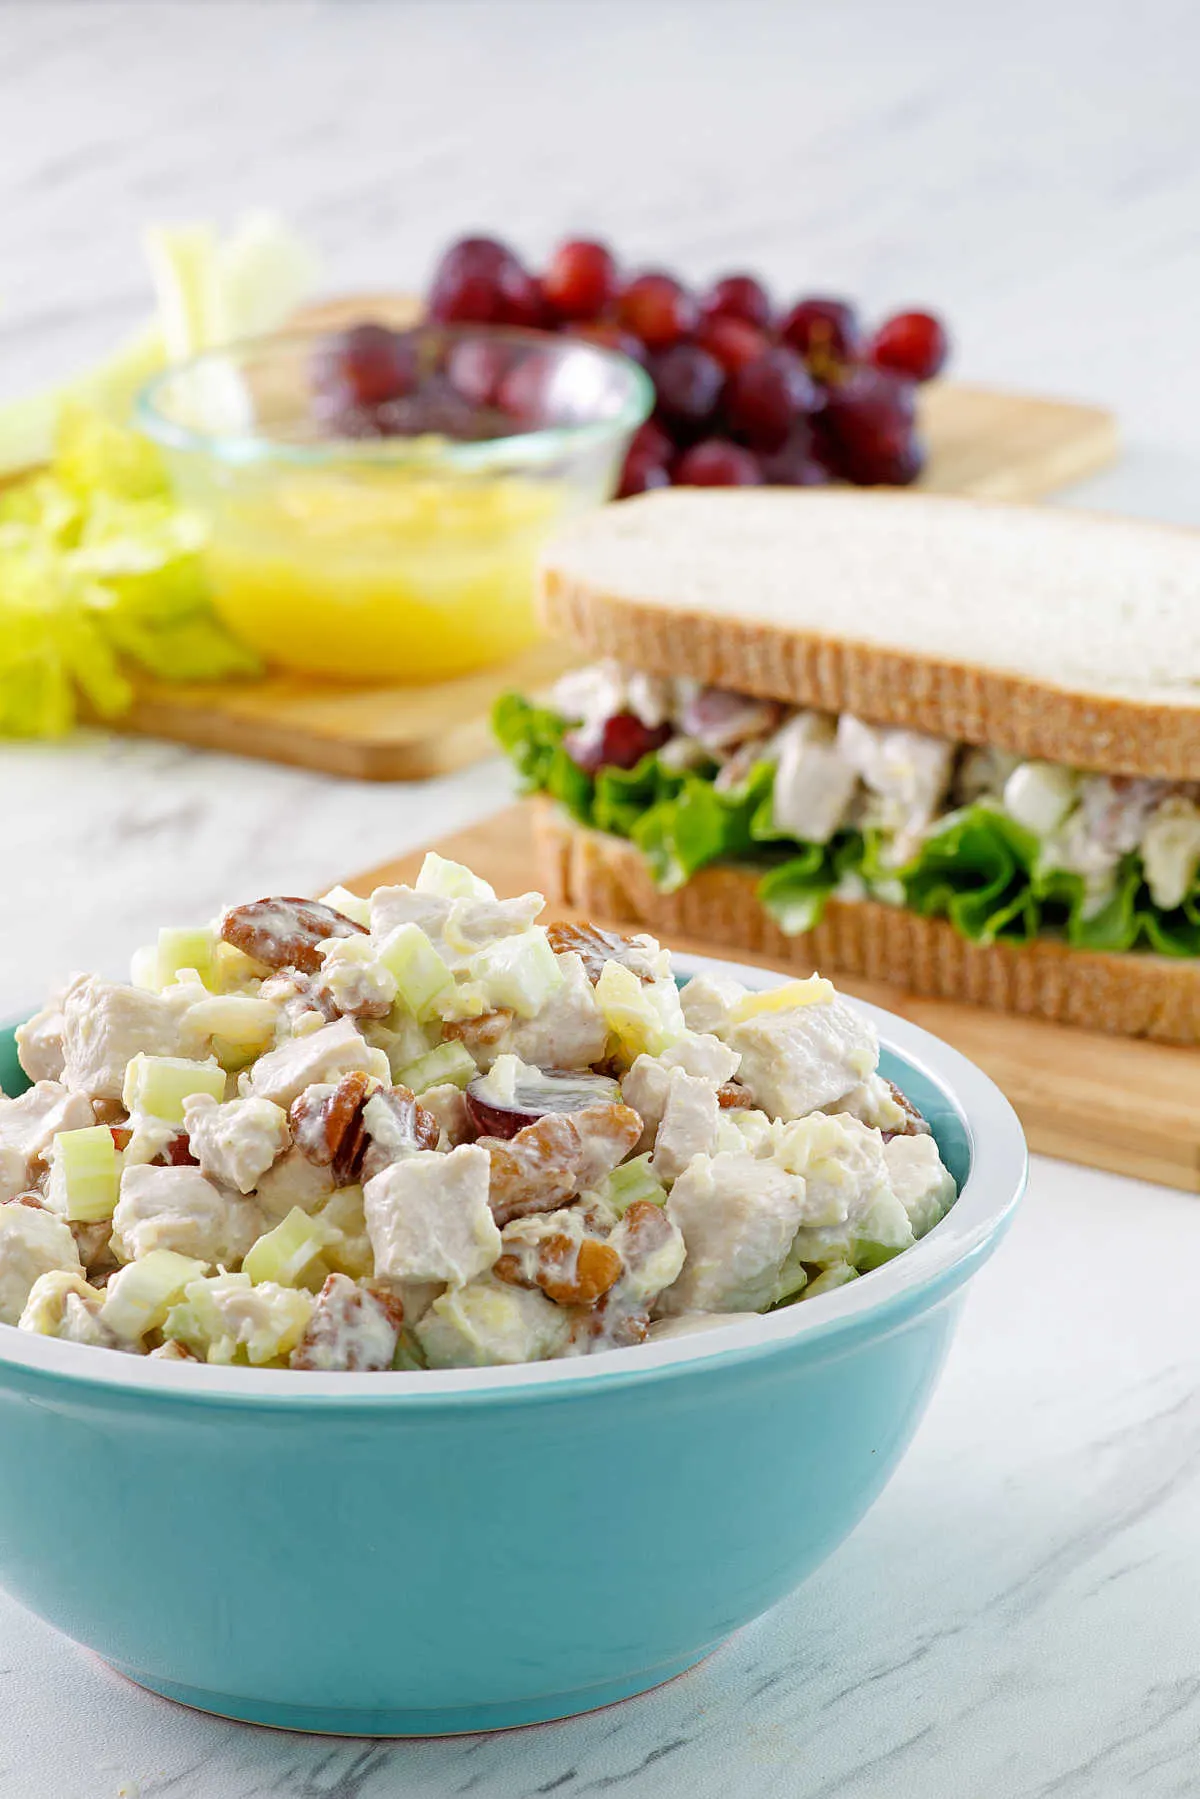 Bowl of fruited chicken salad with sandwich and remaining ingredients in the background.